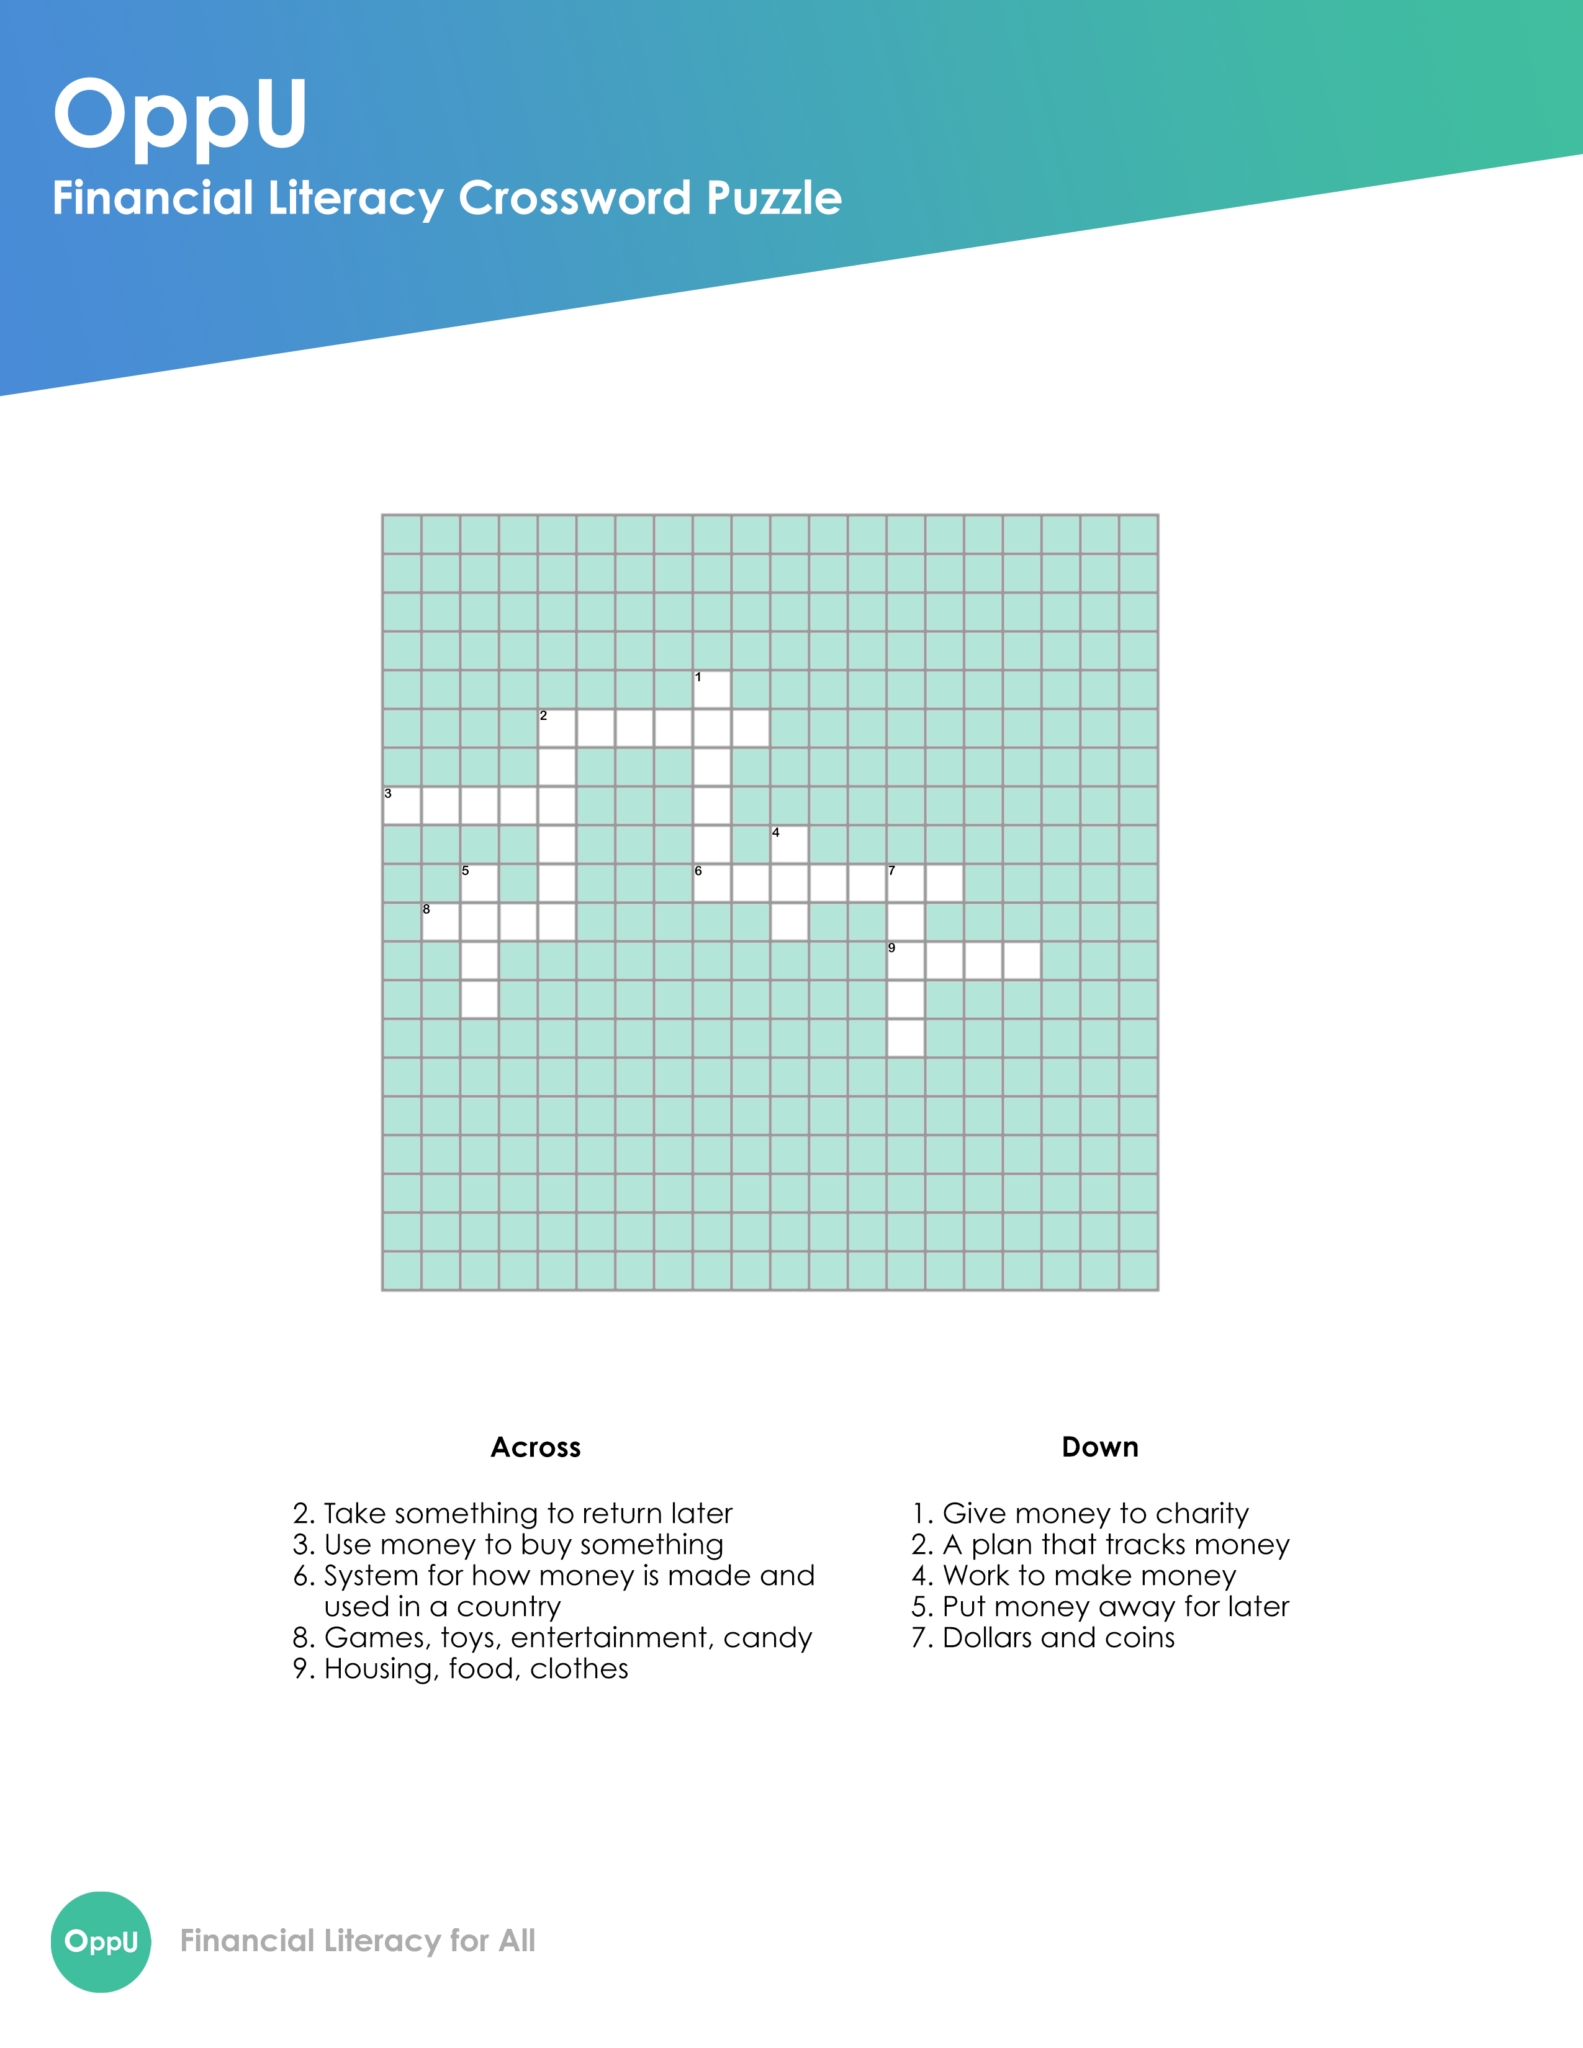 Financial Literacy Crossword Puzzles OppU